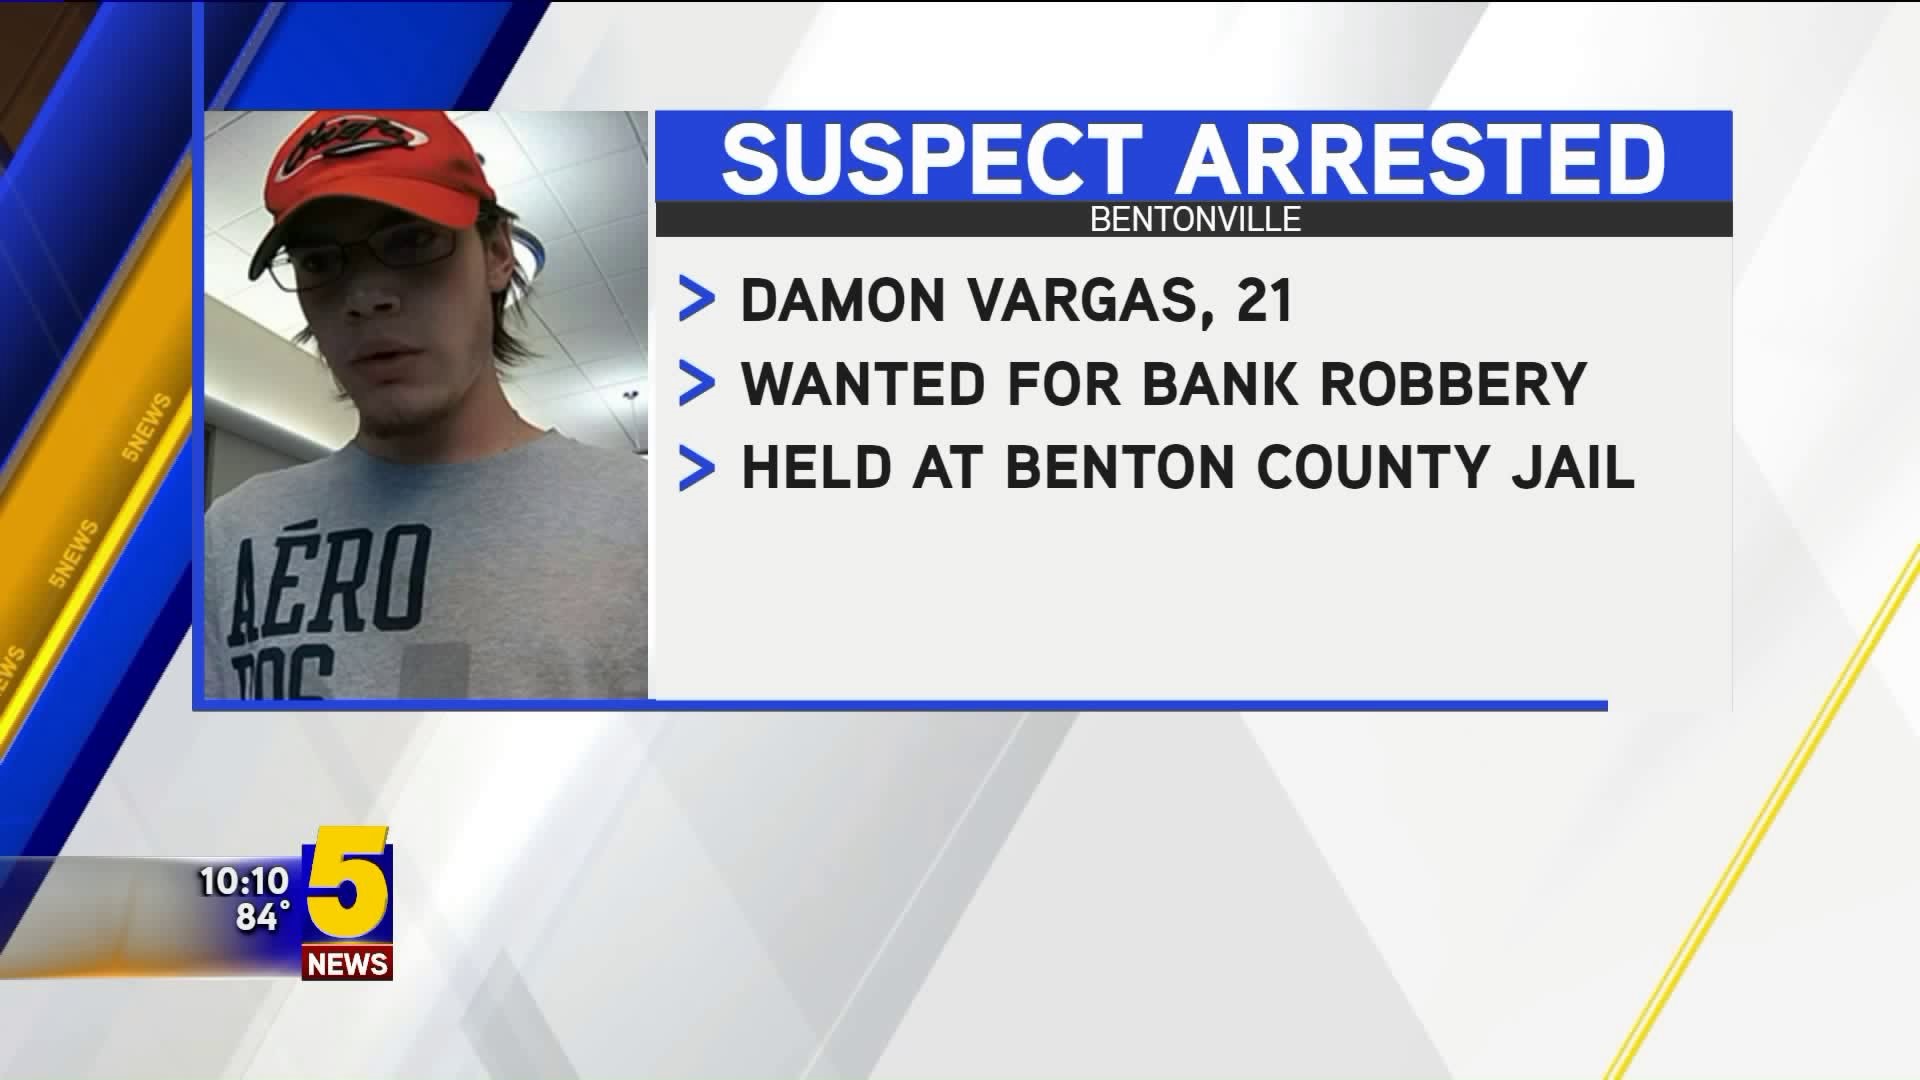 Bentonville Bank Robbery Suspect Arrested